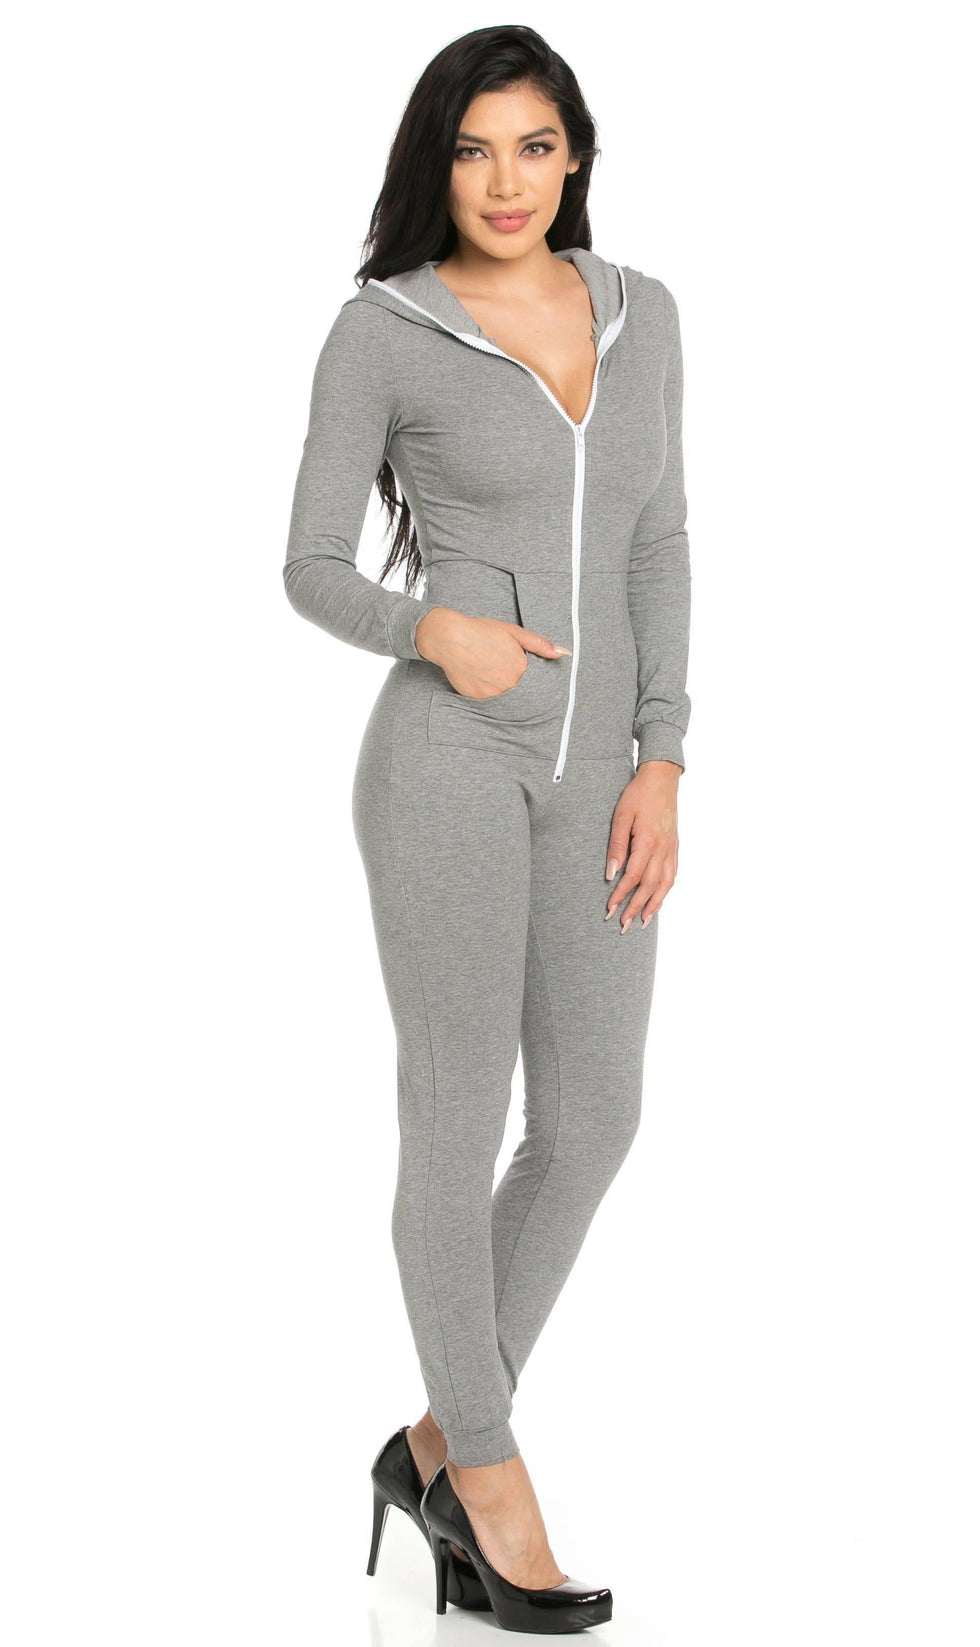 Hooded Zipped Up Jumpsuit Onesie in Gray – SohoGirl.com